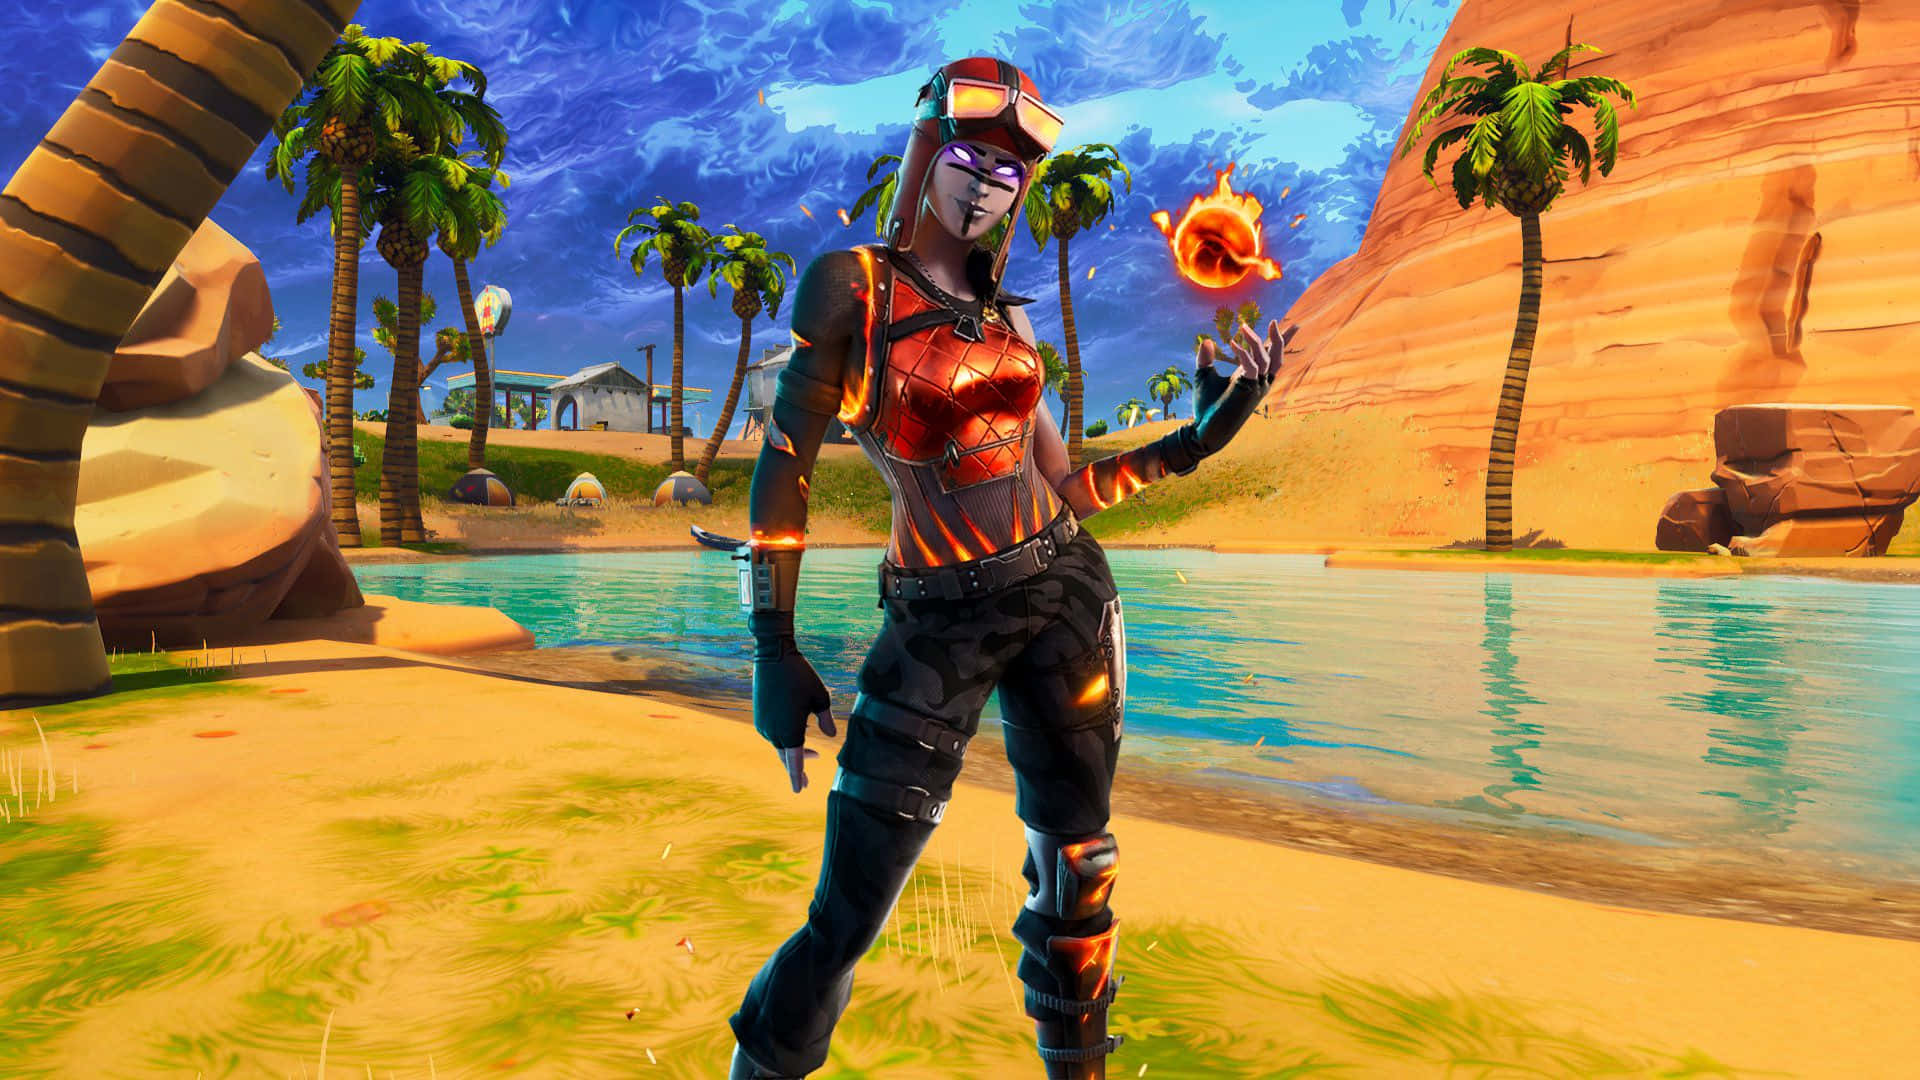 Blaze Fortnite Outfit On The Shores Of The Lake Wallpaper